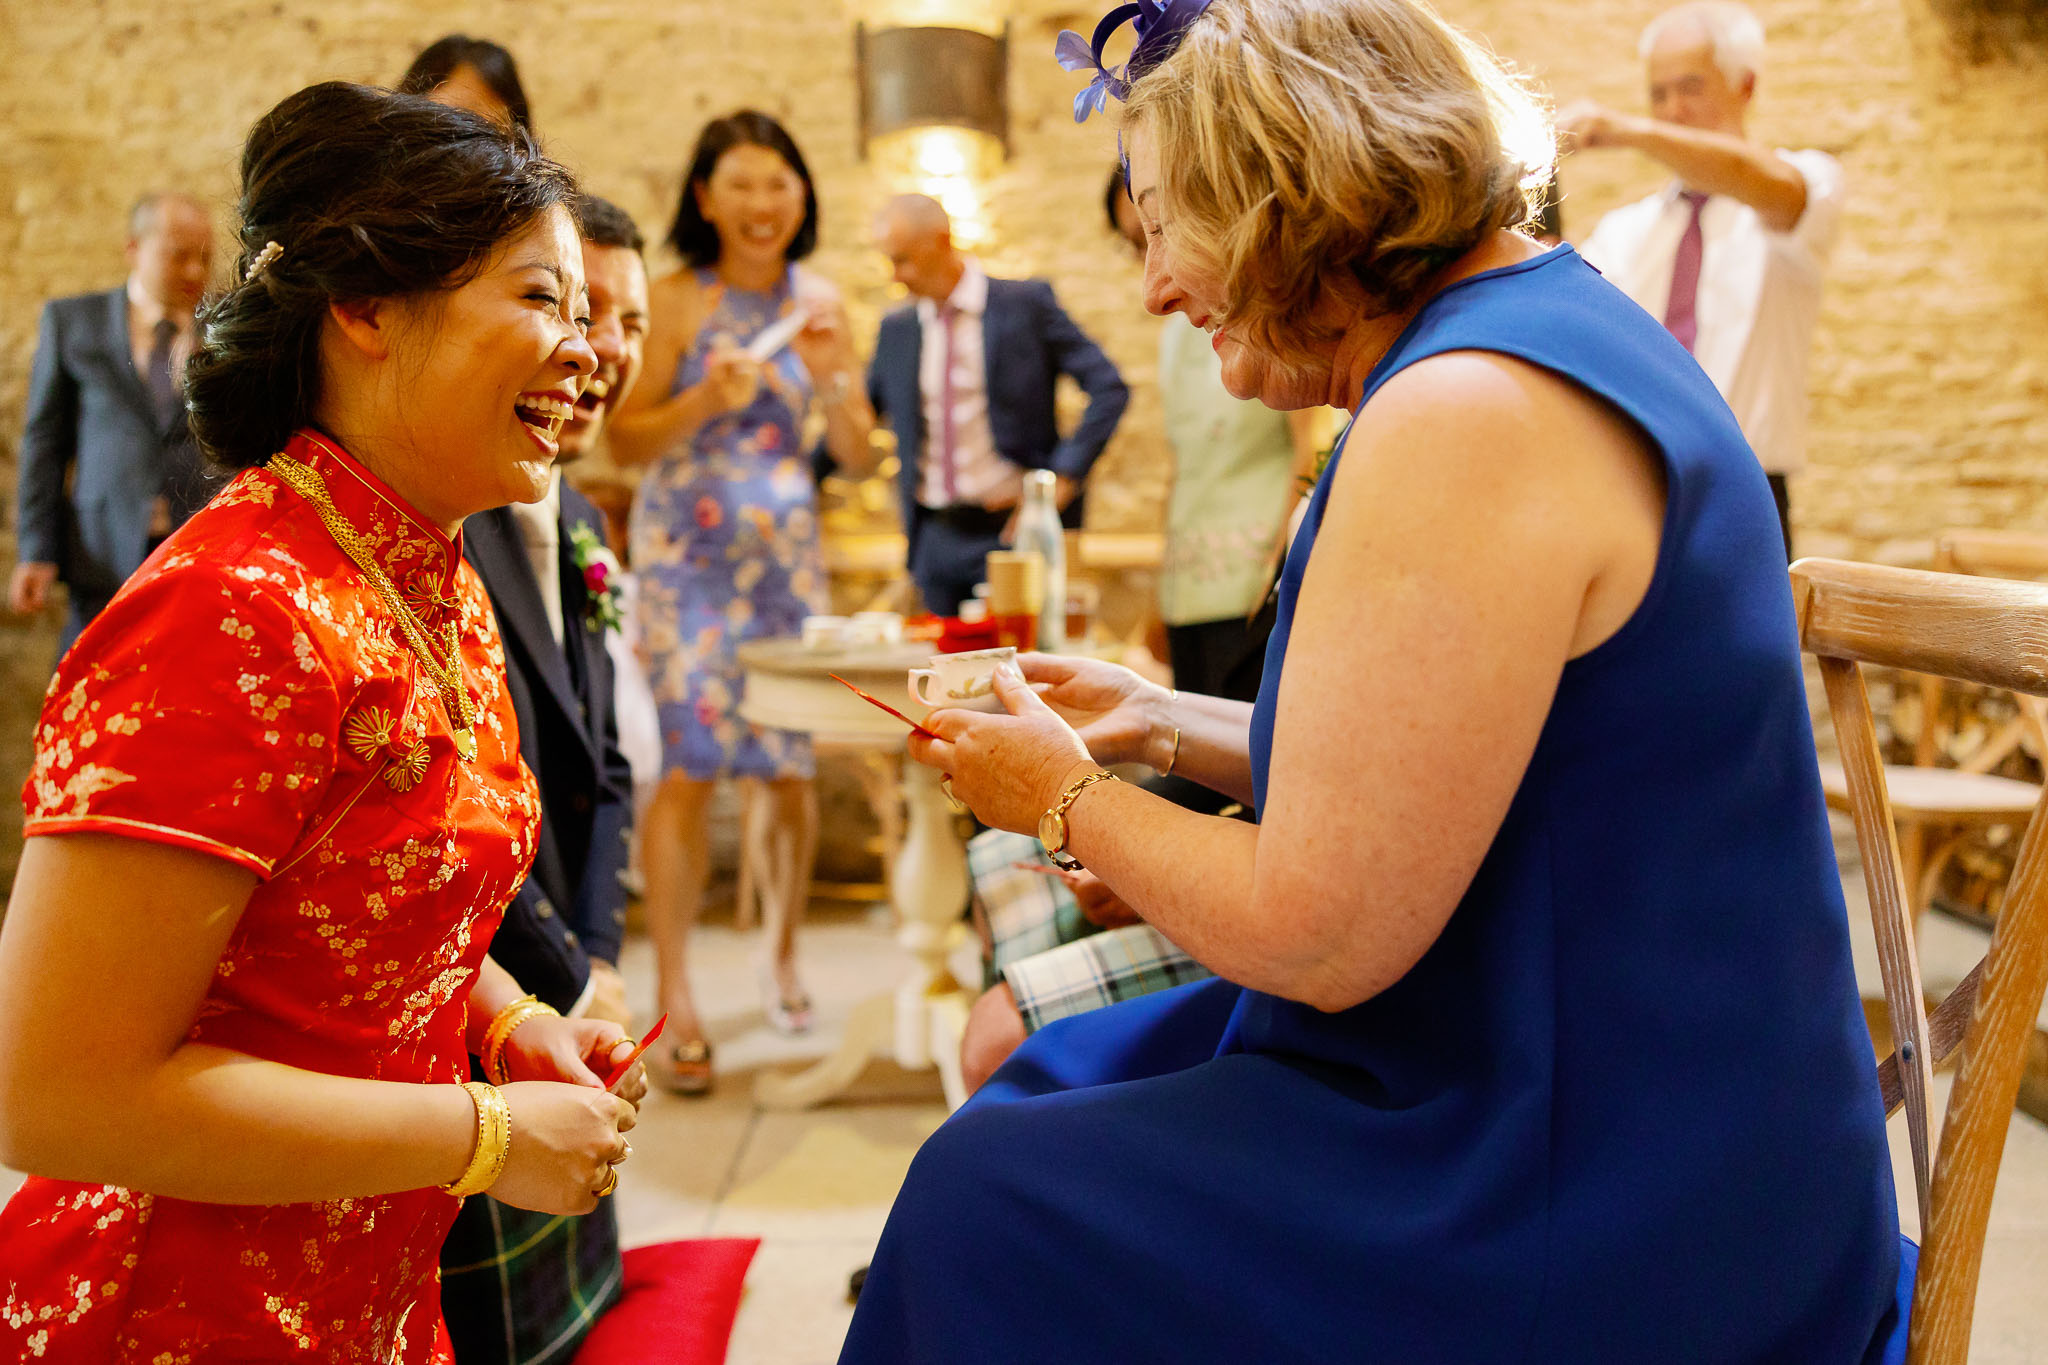 Chinese Tea Ceremony at a UK wedding 